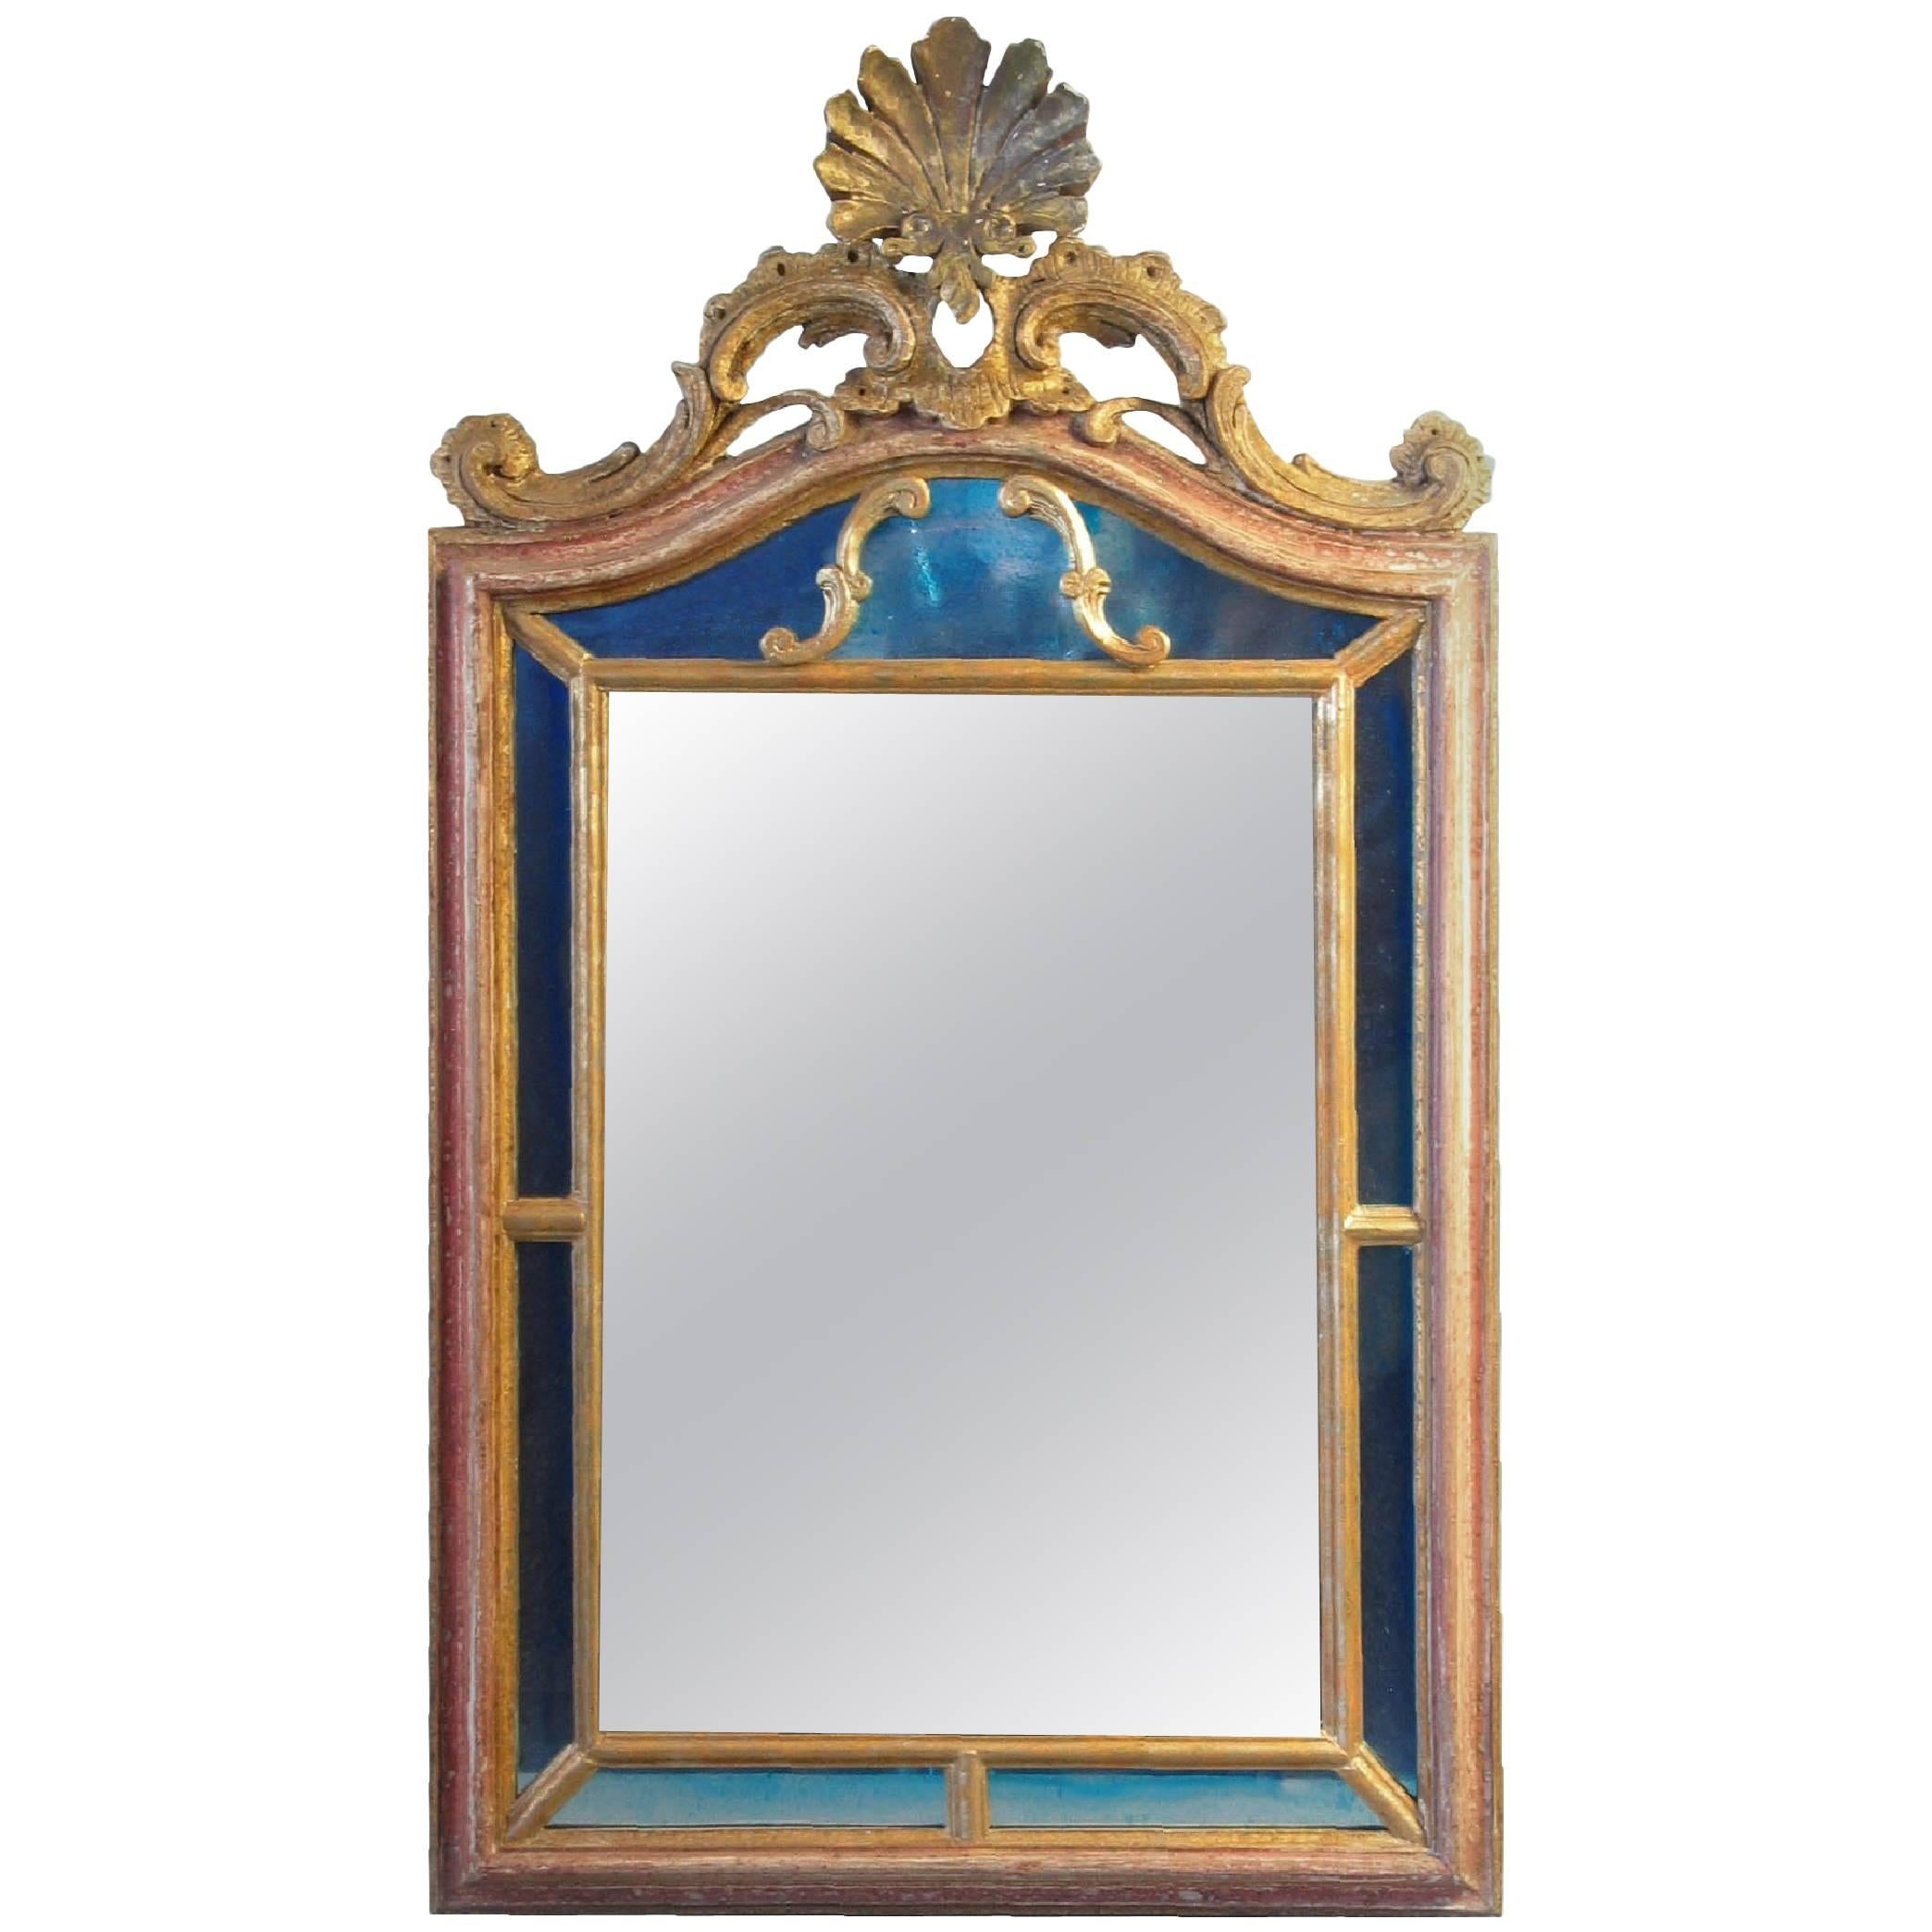 Hand-Carved Parcel-Gilt Florentine Mirror in Rococo Style